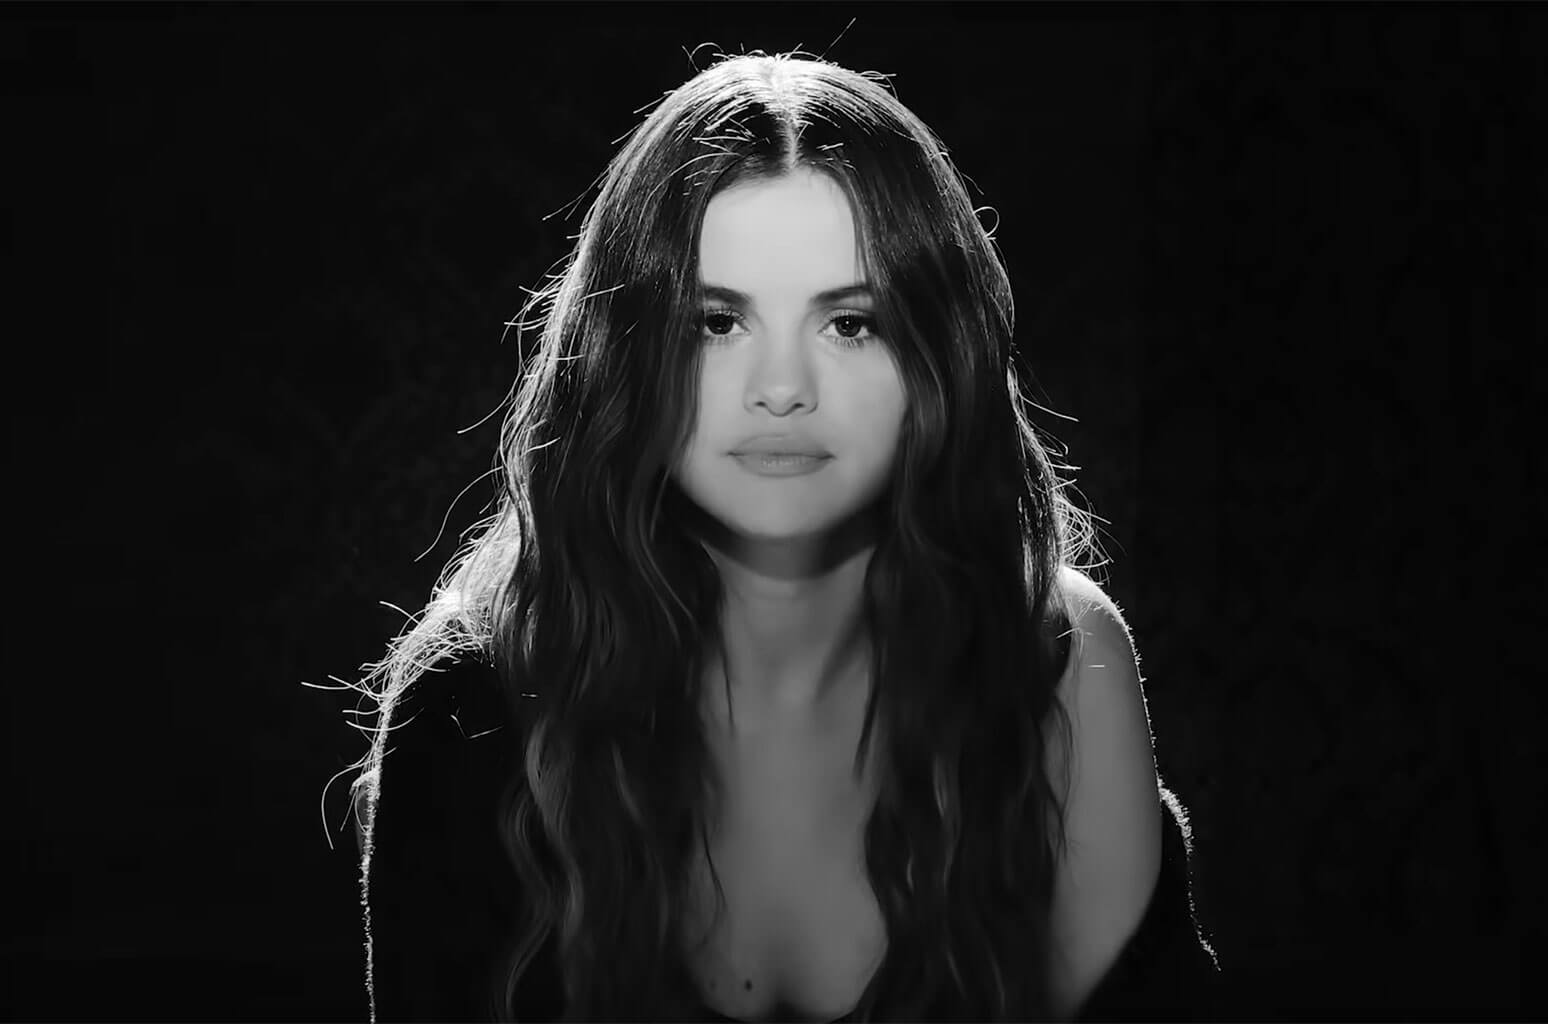 Selena Gomez’s “Lose You to Love Me” Explores Self-Love in the Midst of an Unhealthy Relationship